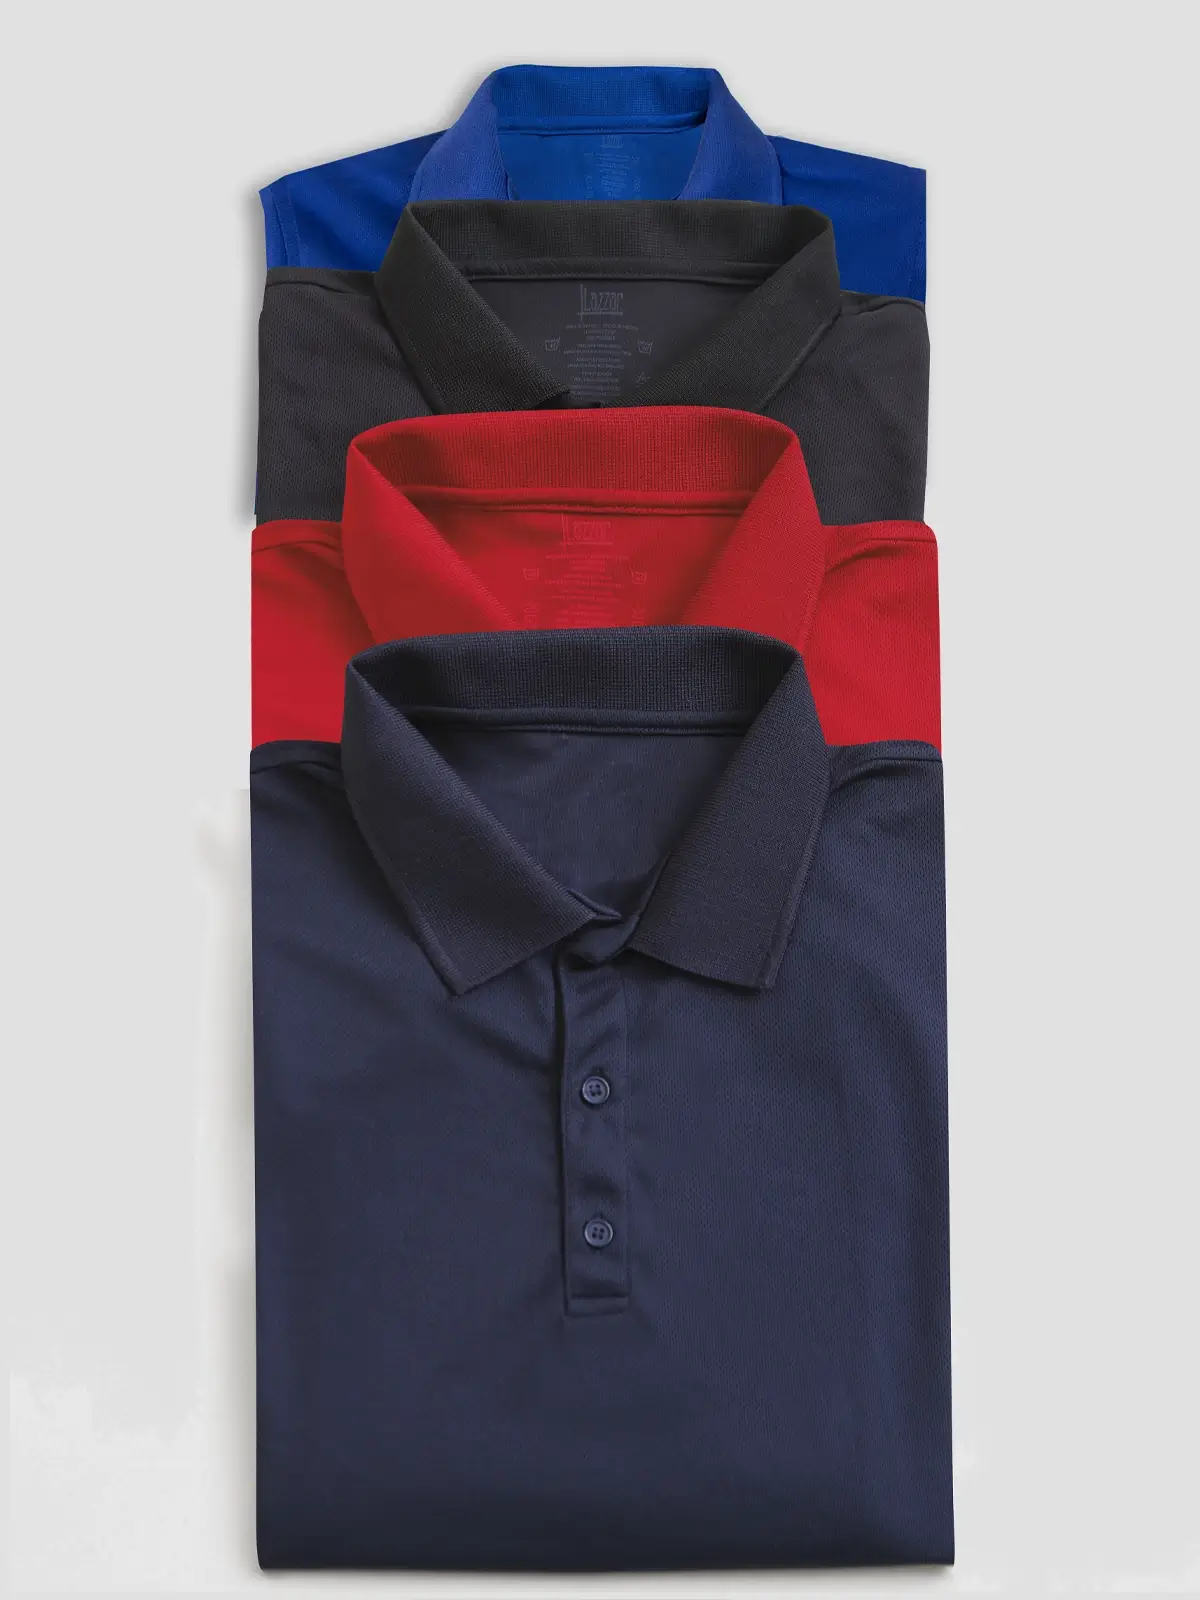 USA Dry Fit Polo